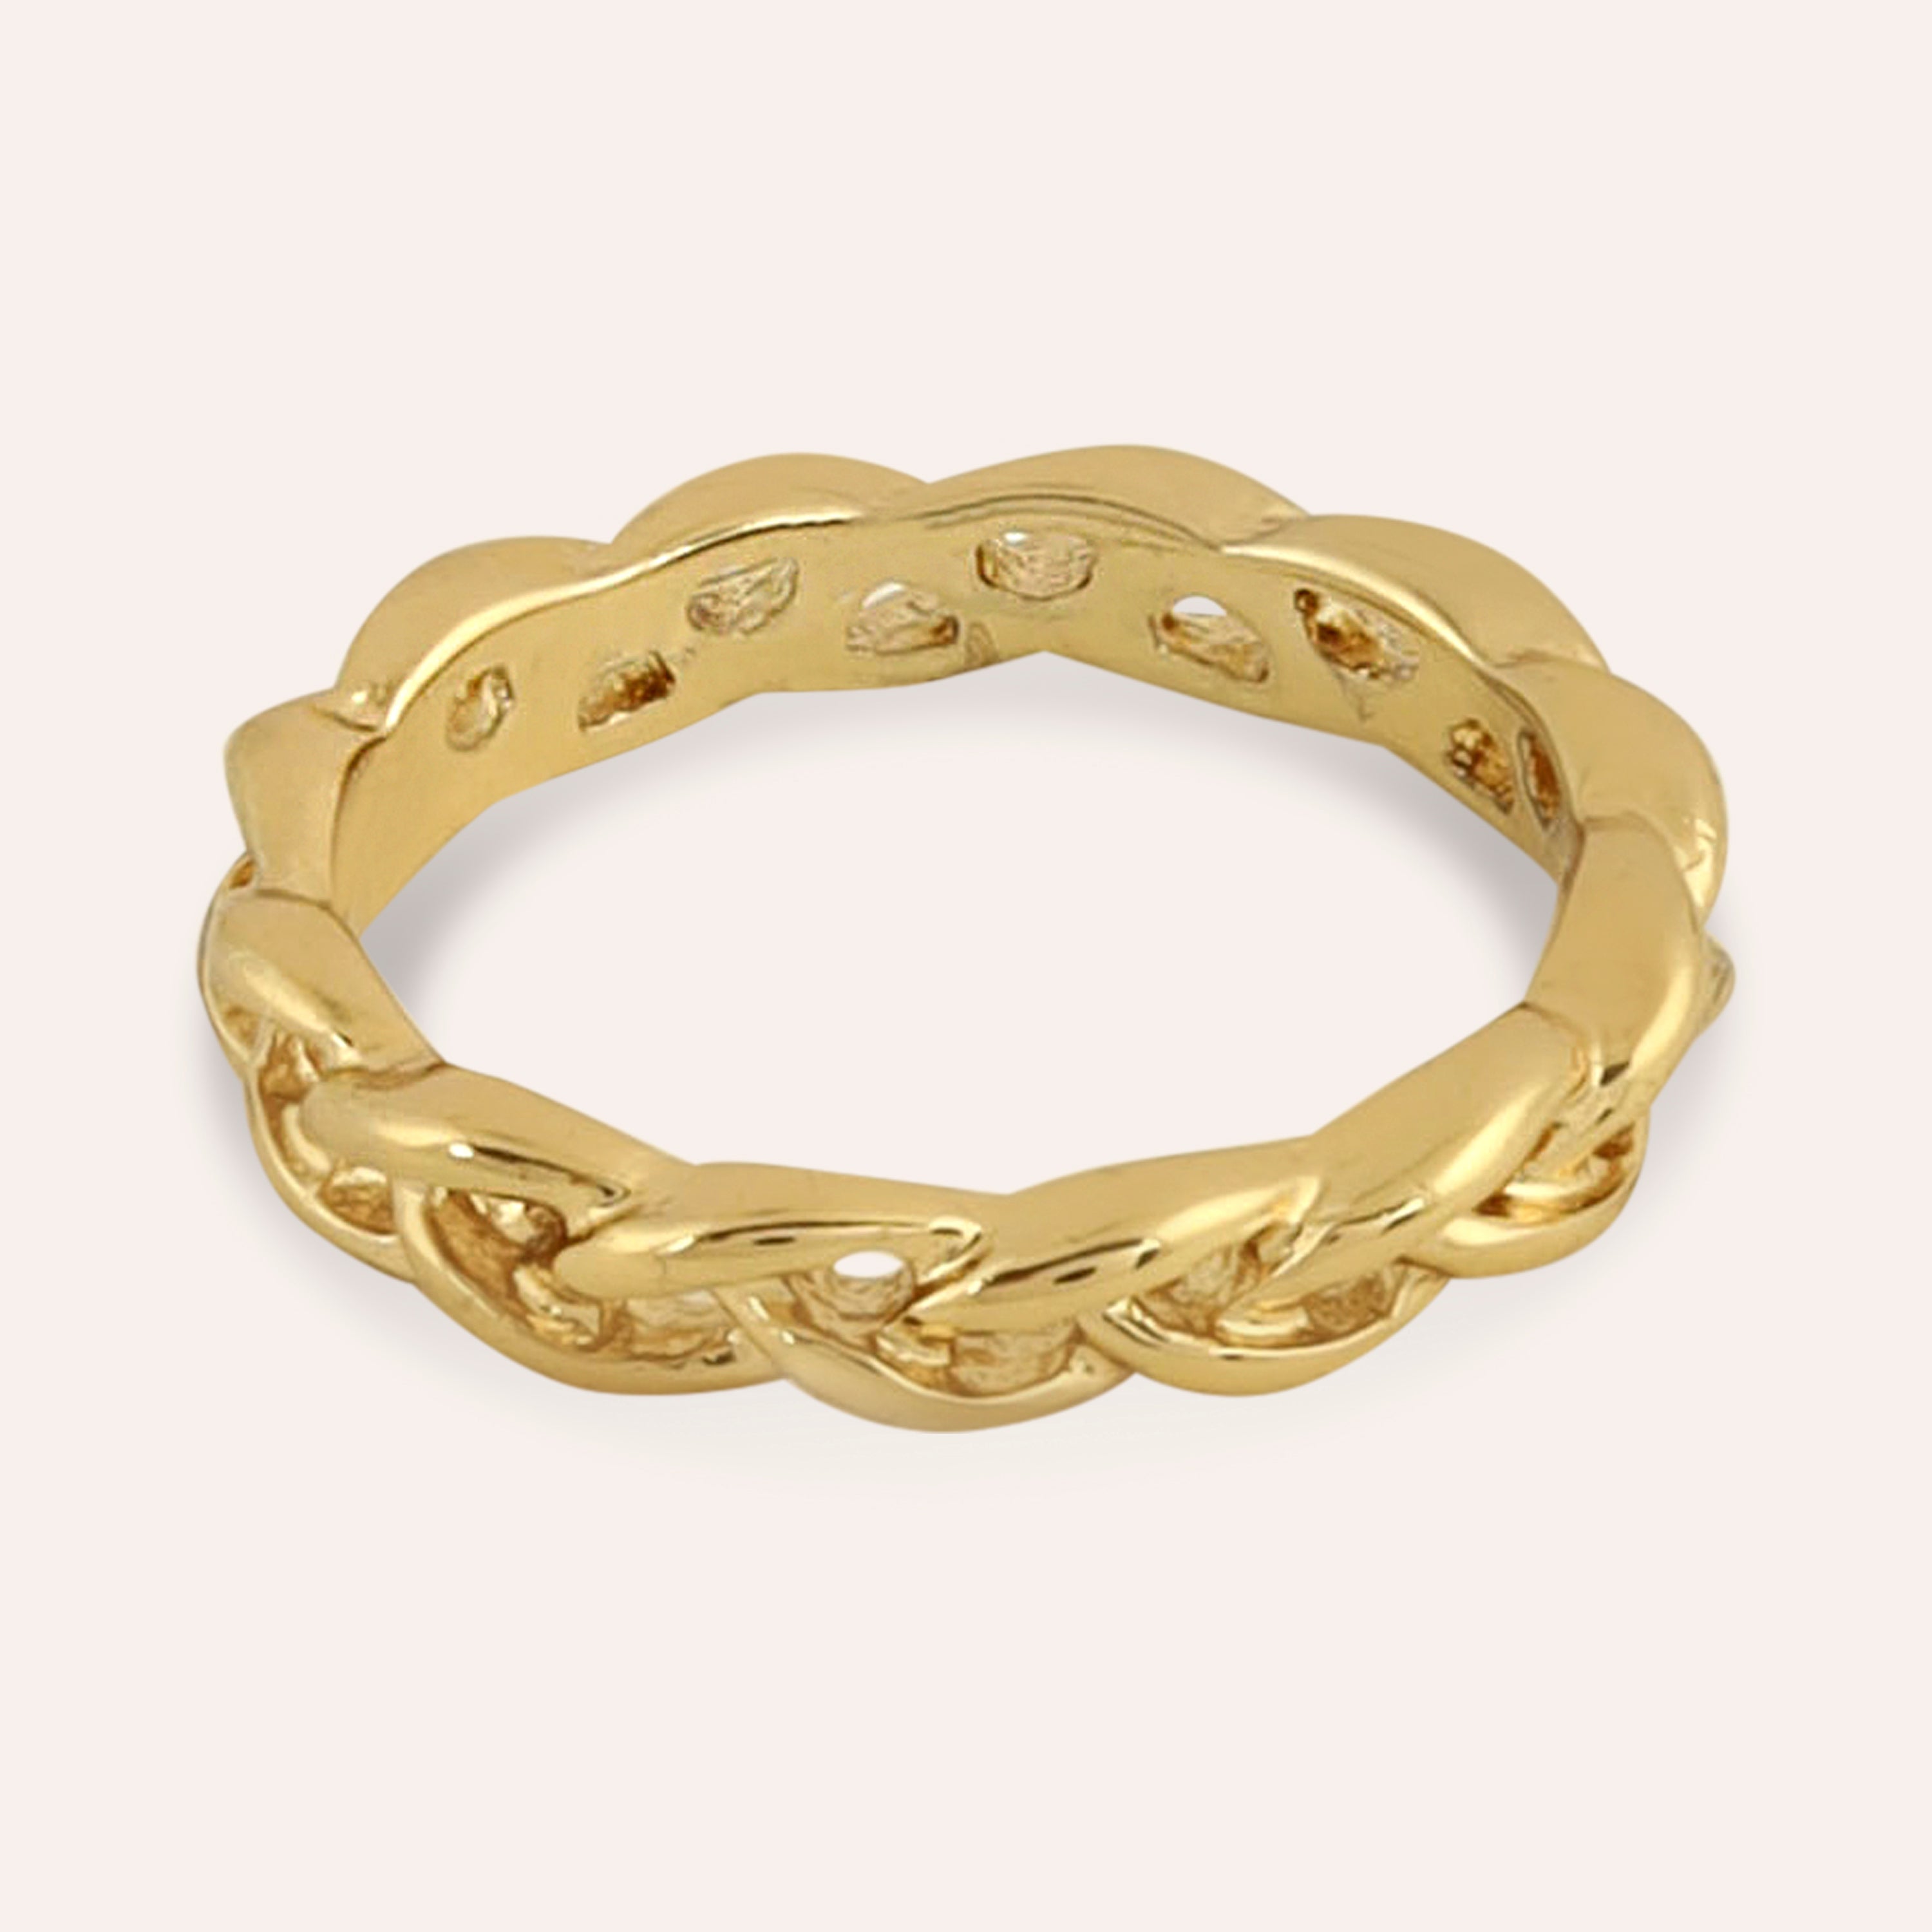 TFC Braidwhisper Gold Plated Ring- Elevate your style with our exquisite collection of gold-plated adjustable rings for women, including timeless signet rings. Explore cheapest fashion jewellery designs with anti-tarnish properties, all at The Fun Company with a touch of elegance